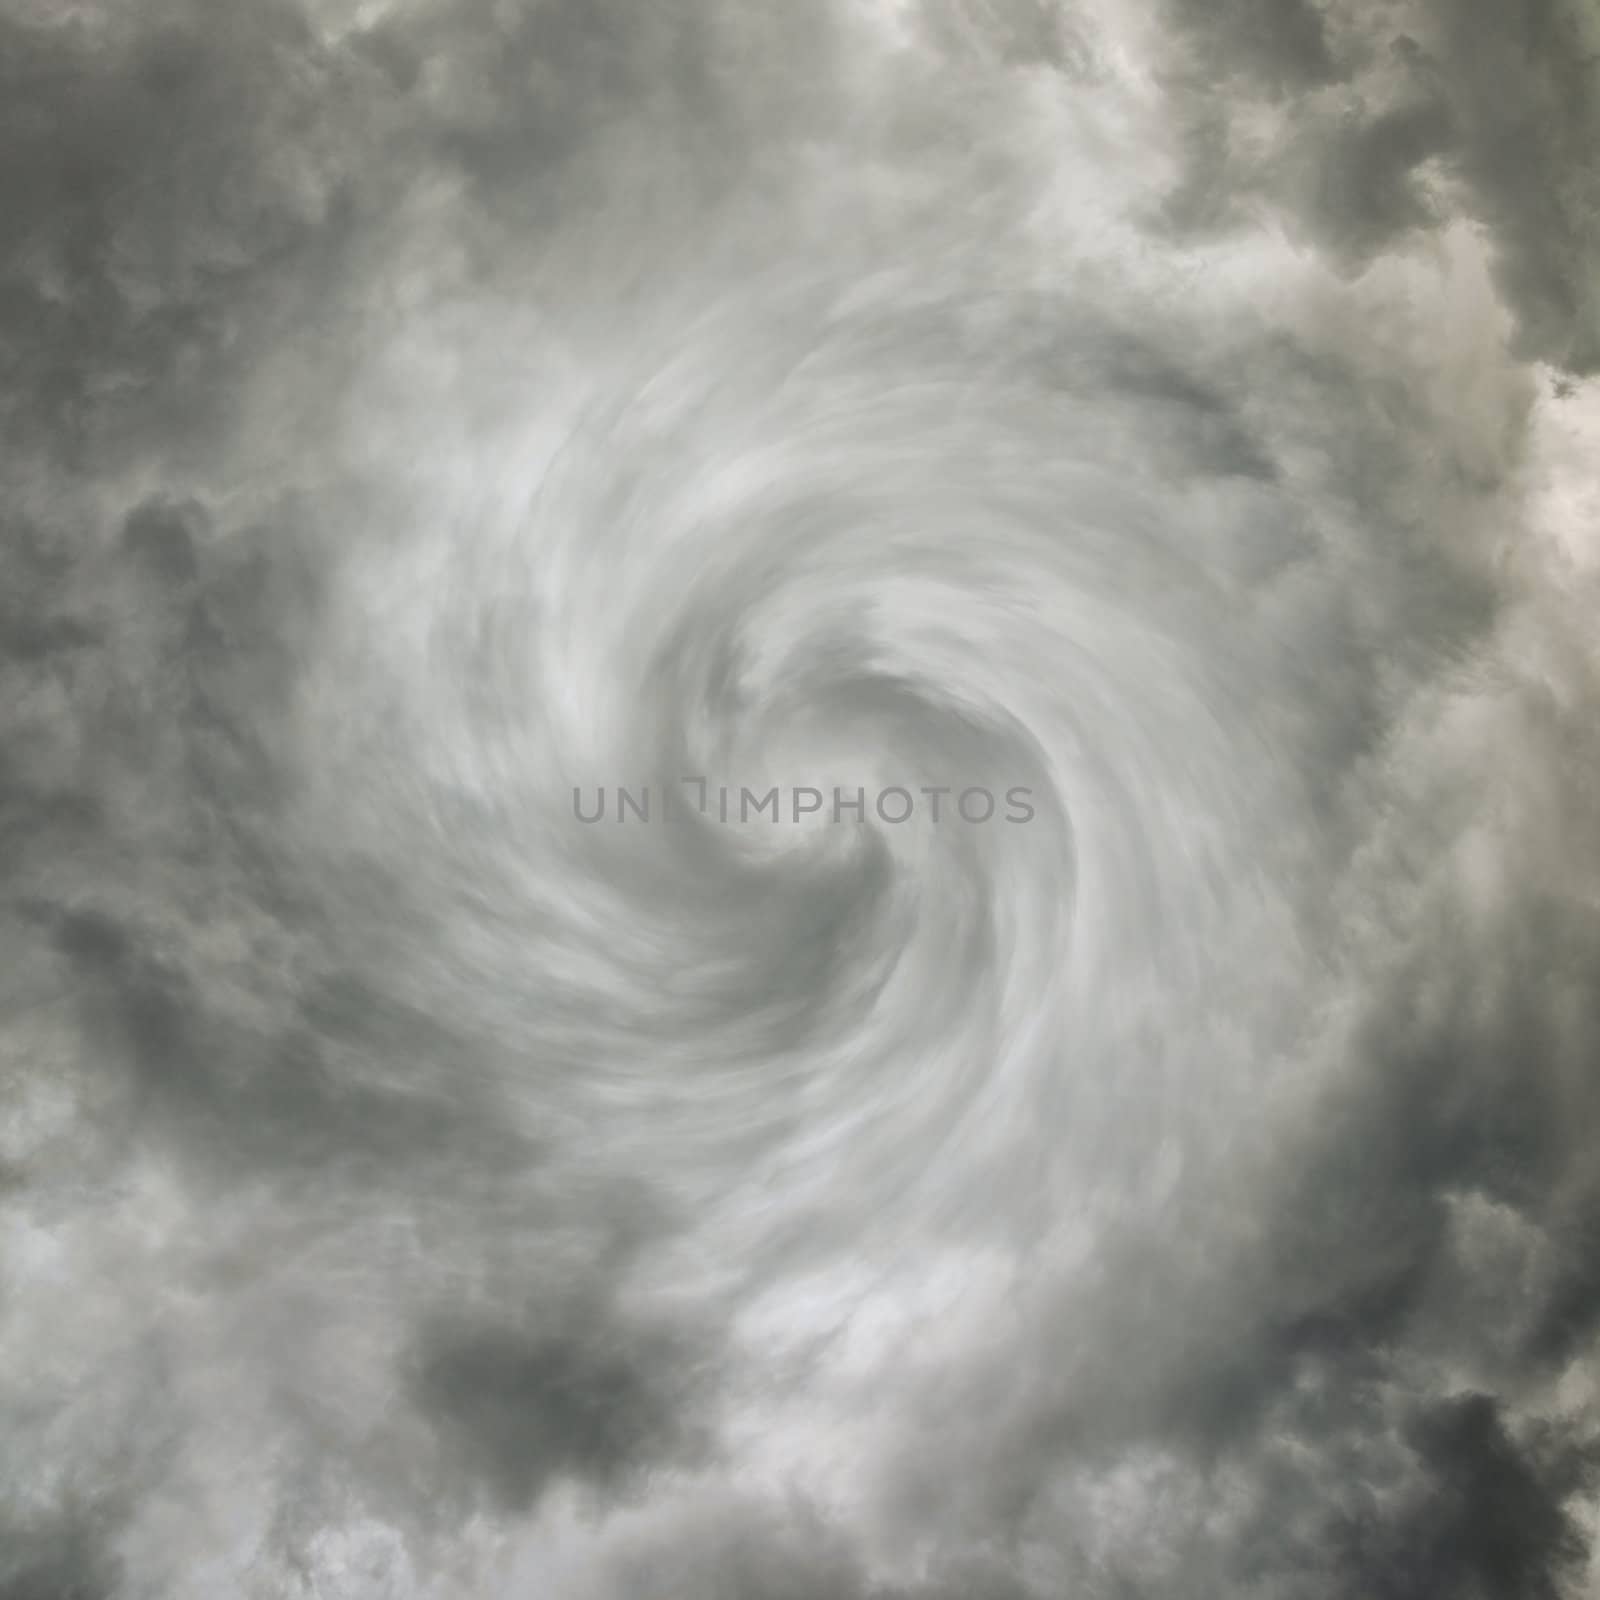 Twisting spiral sky with storm clouds by pzaxe